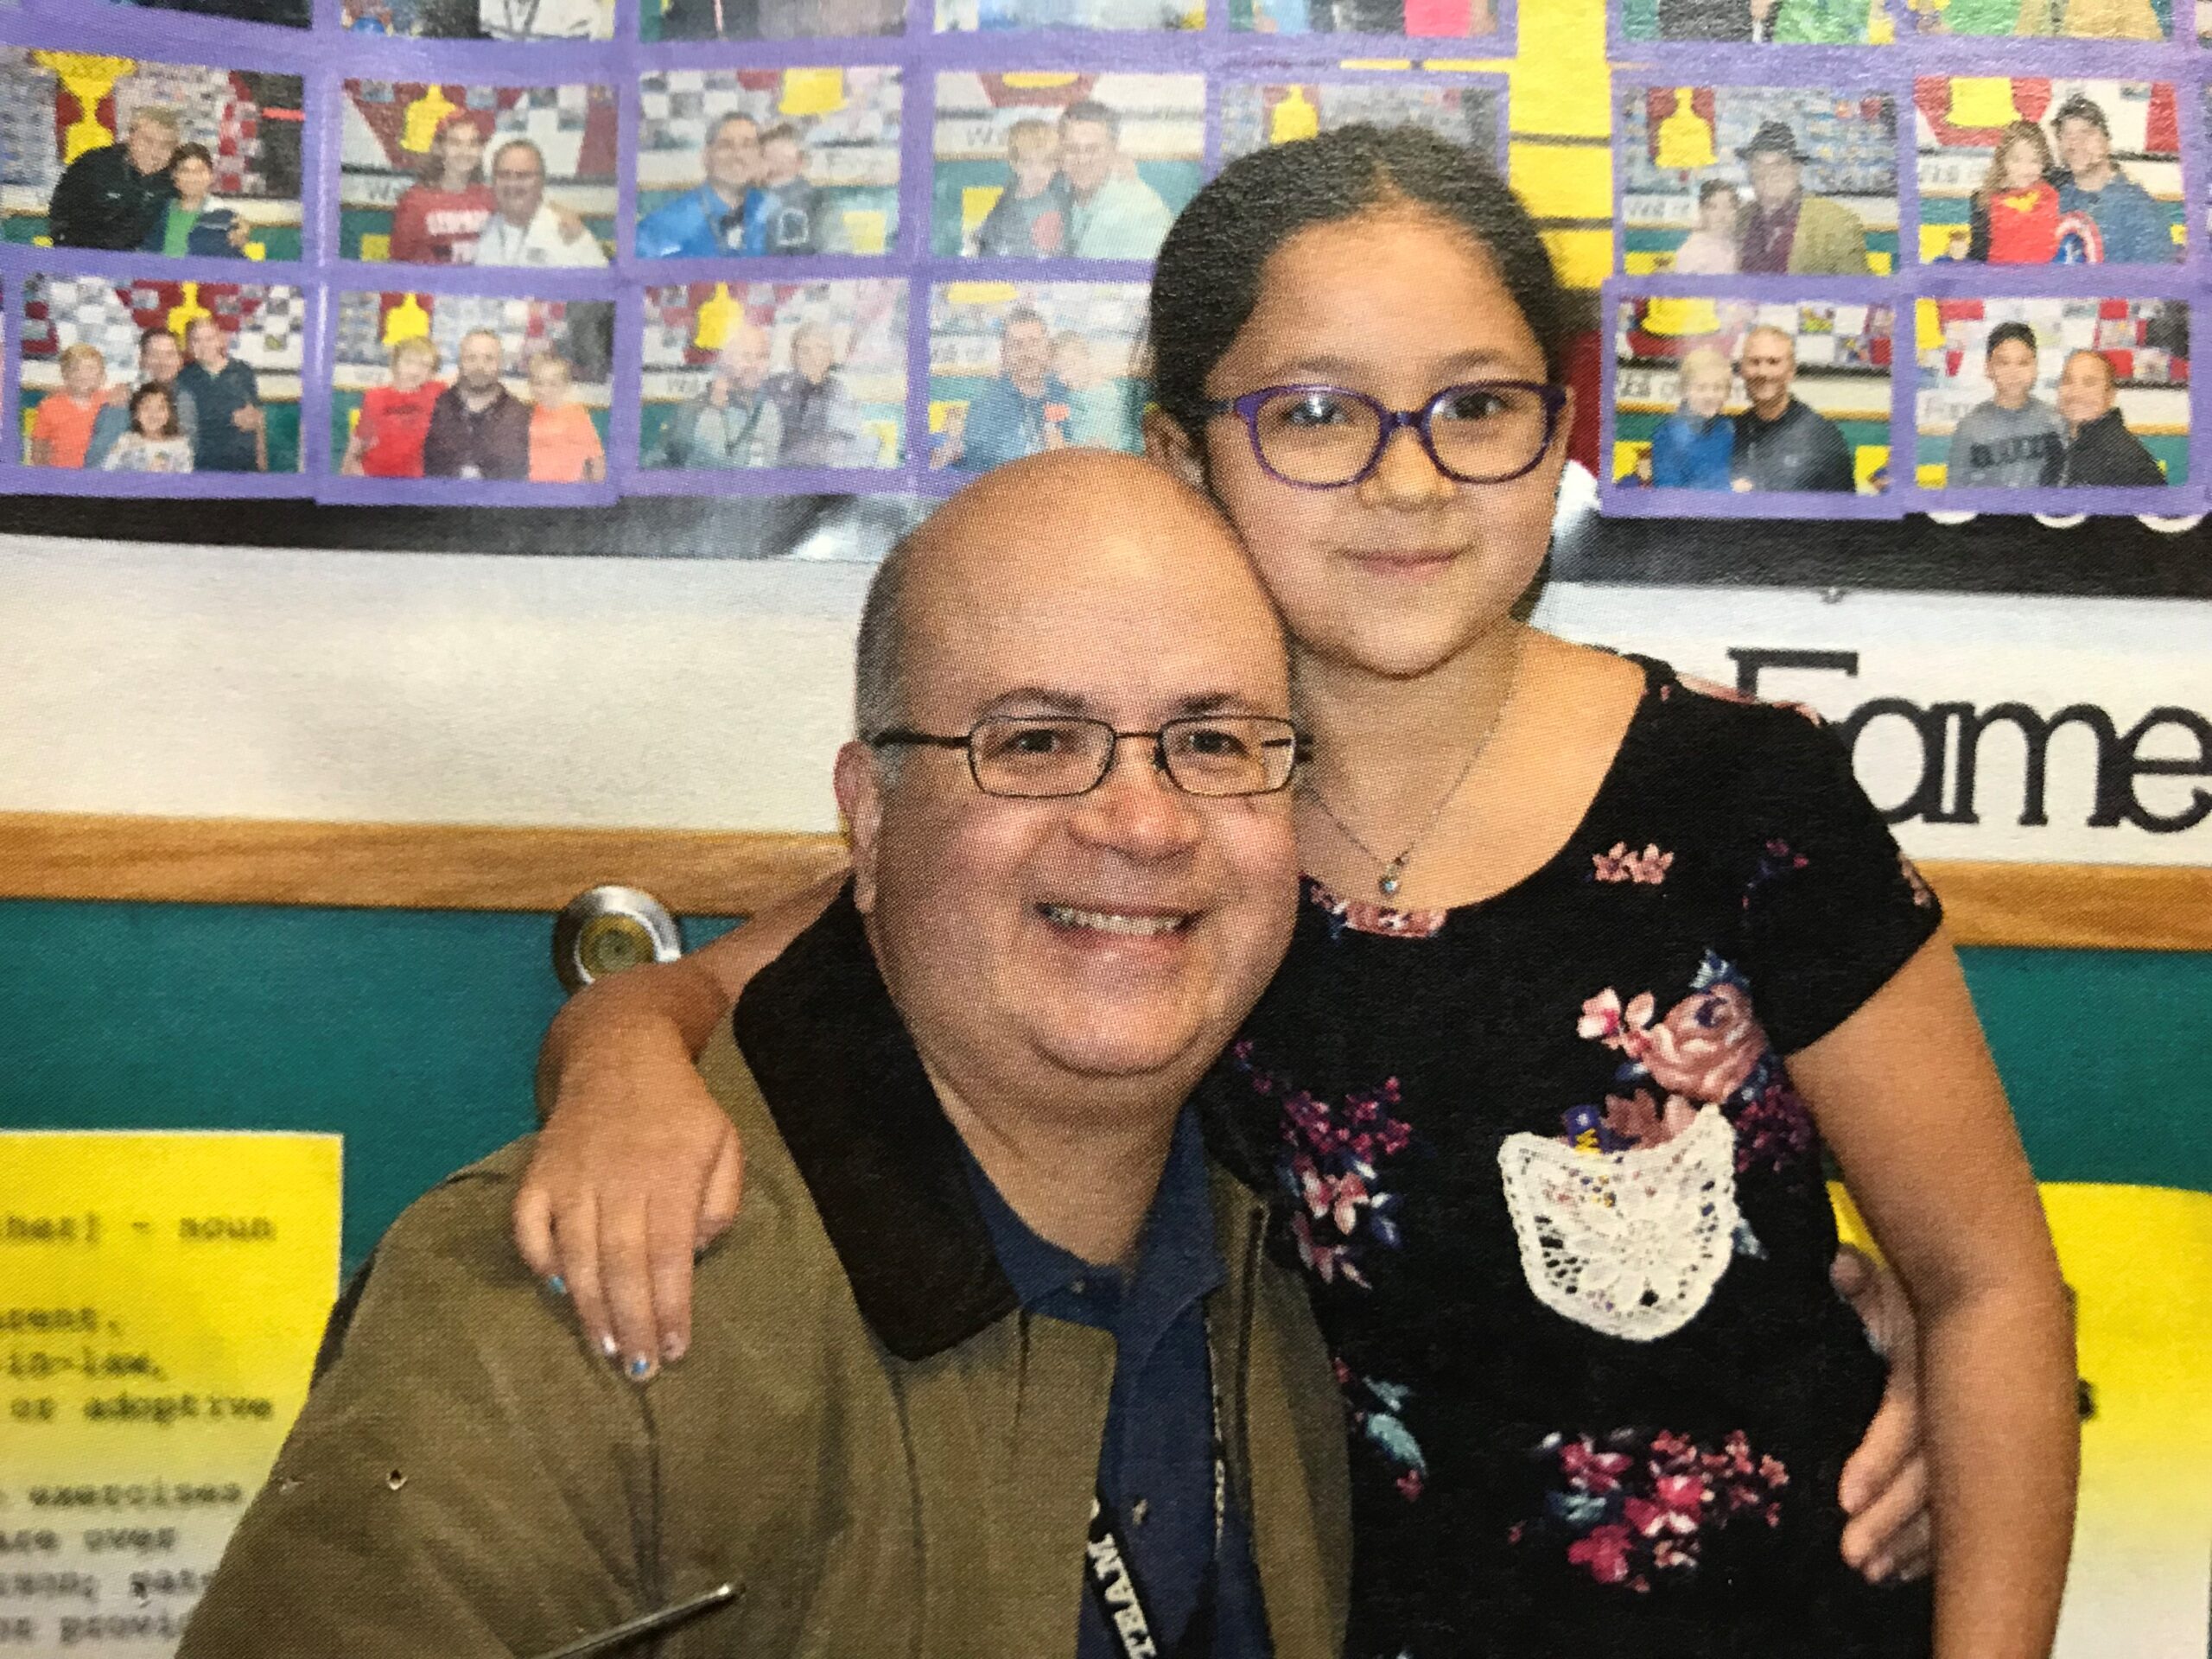 Dr. Martinez and his daughter, Sofia.